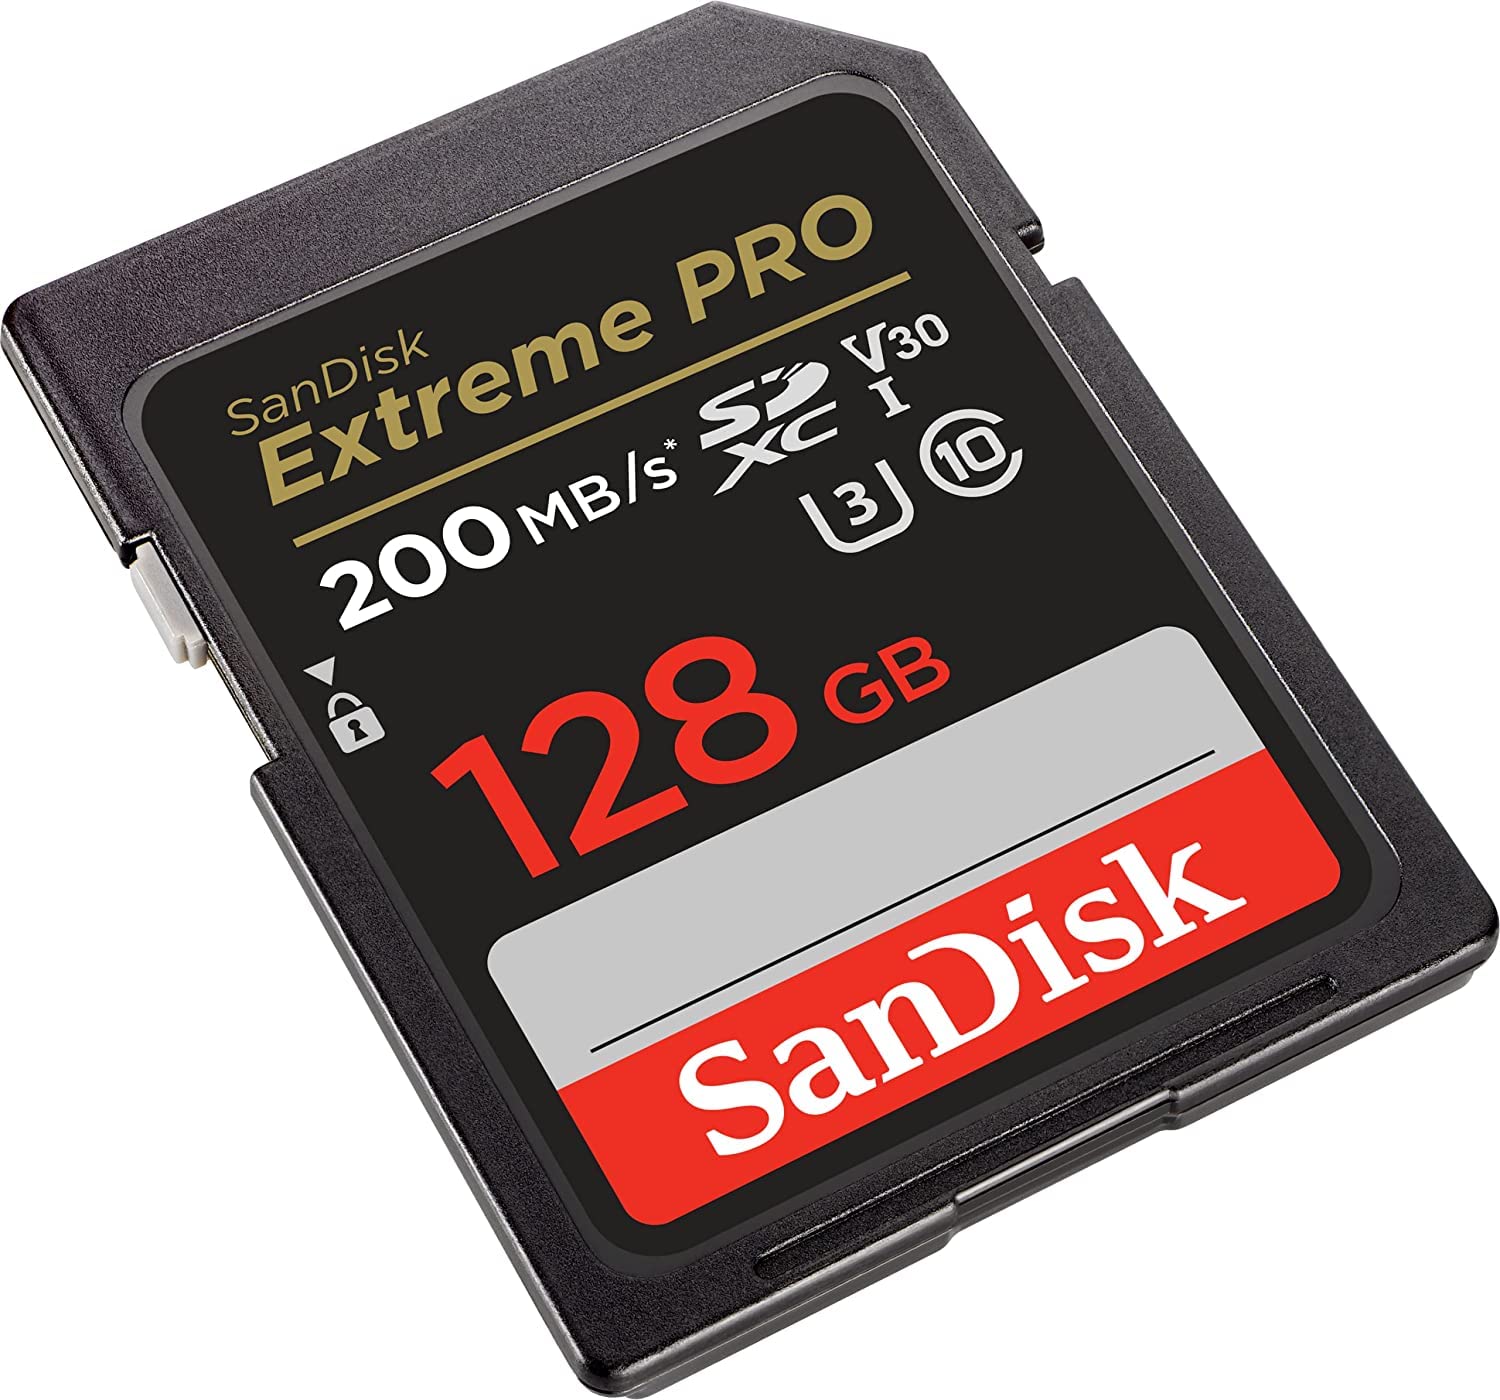 SanDisk 128GB SDXC SD Extreme Pro Memory Card Bundle Works with Canon EOS Rebel SL2, SL1, T4i, T6s Camera 4K (SDSDXXD-128G-GN4IN) Bundle with 1 Everything But Stromboli 3.0 Micro & SD Card Reader